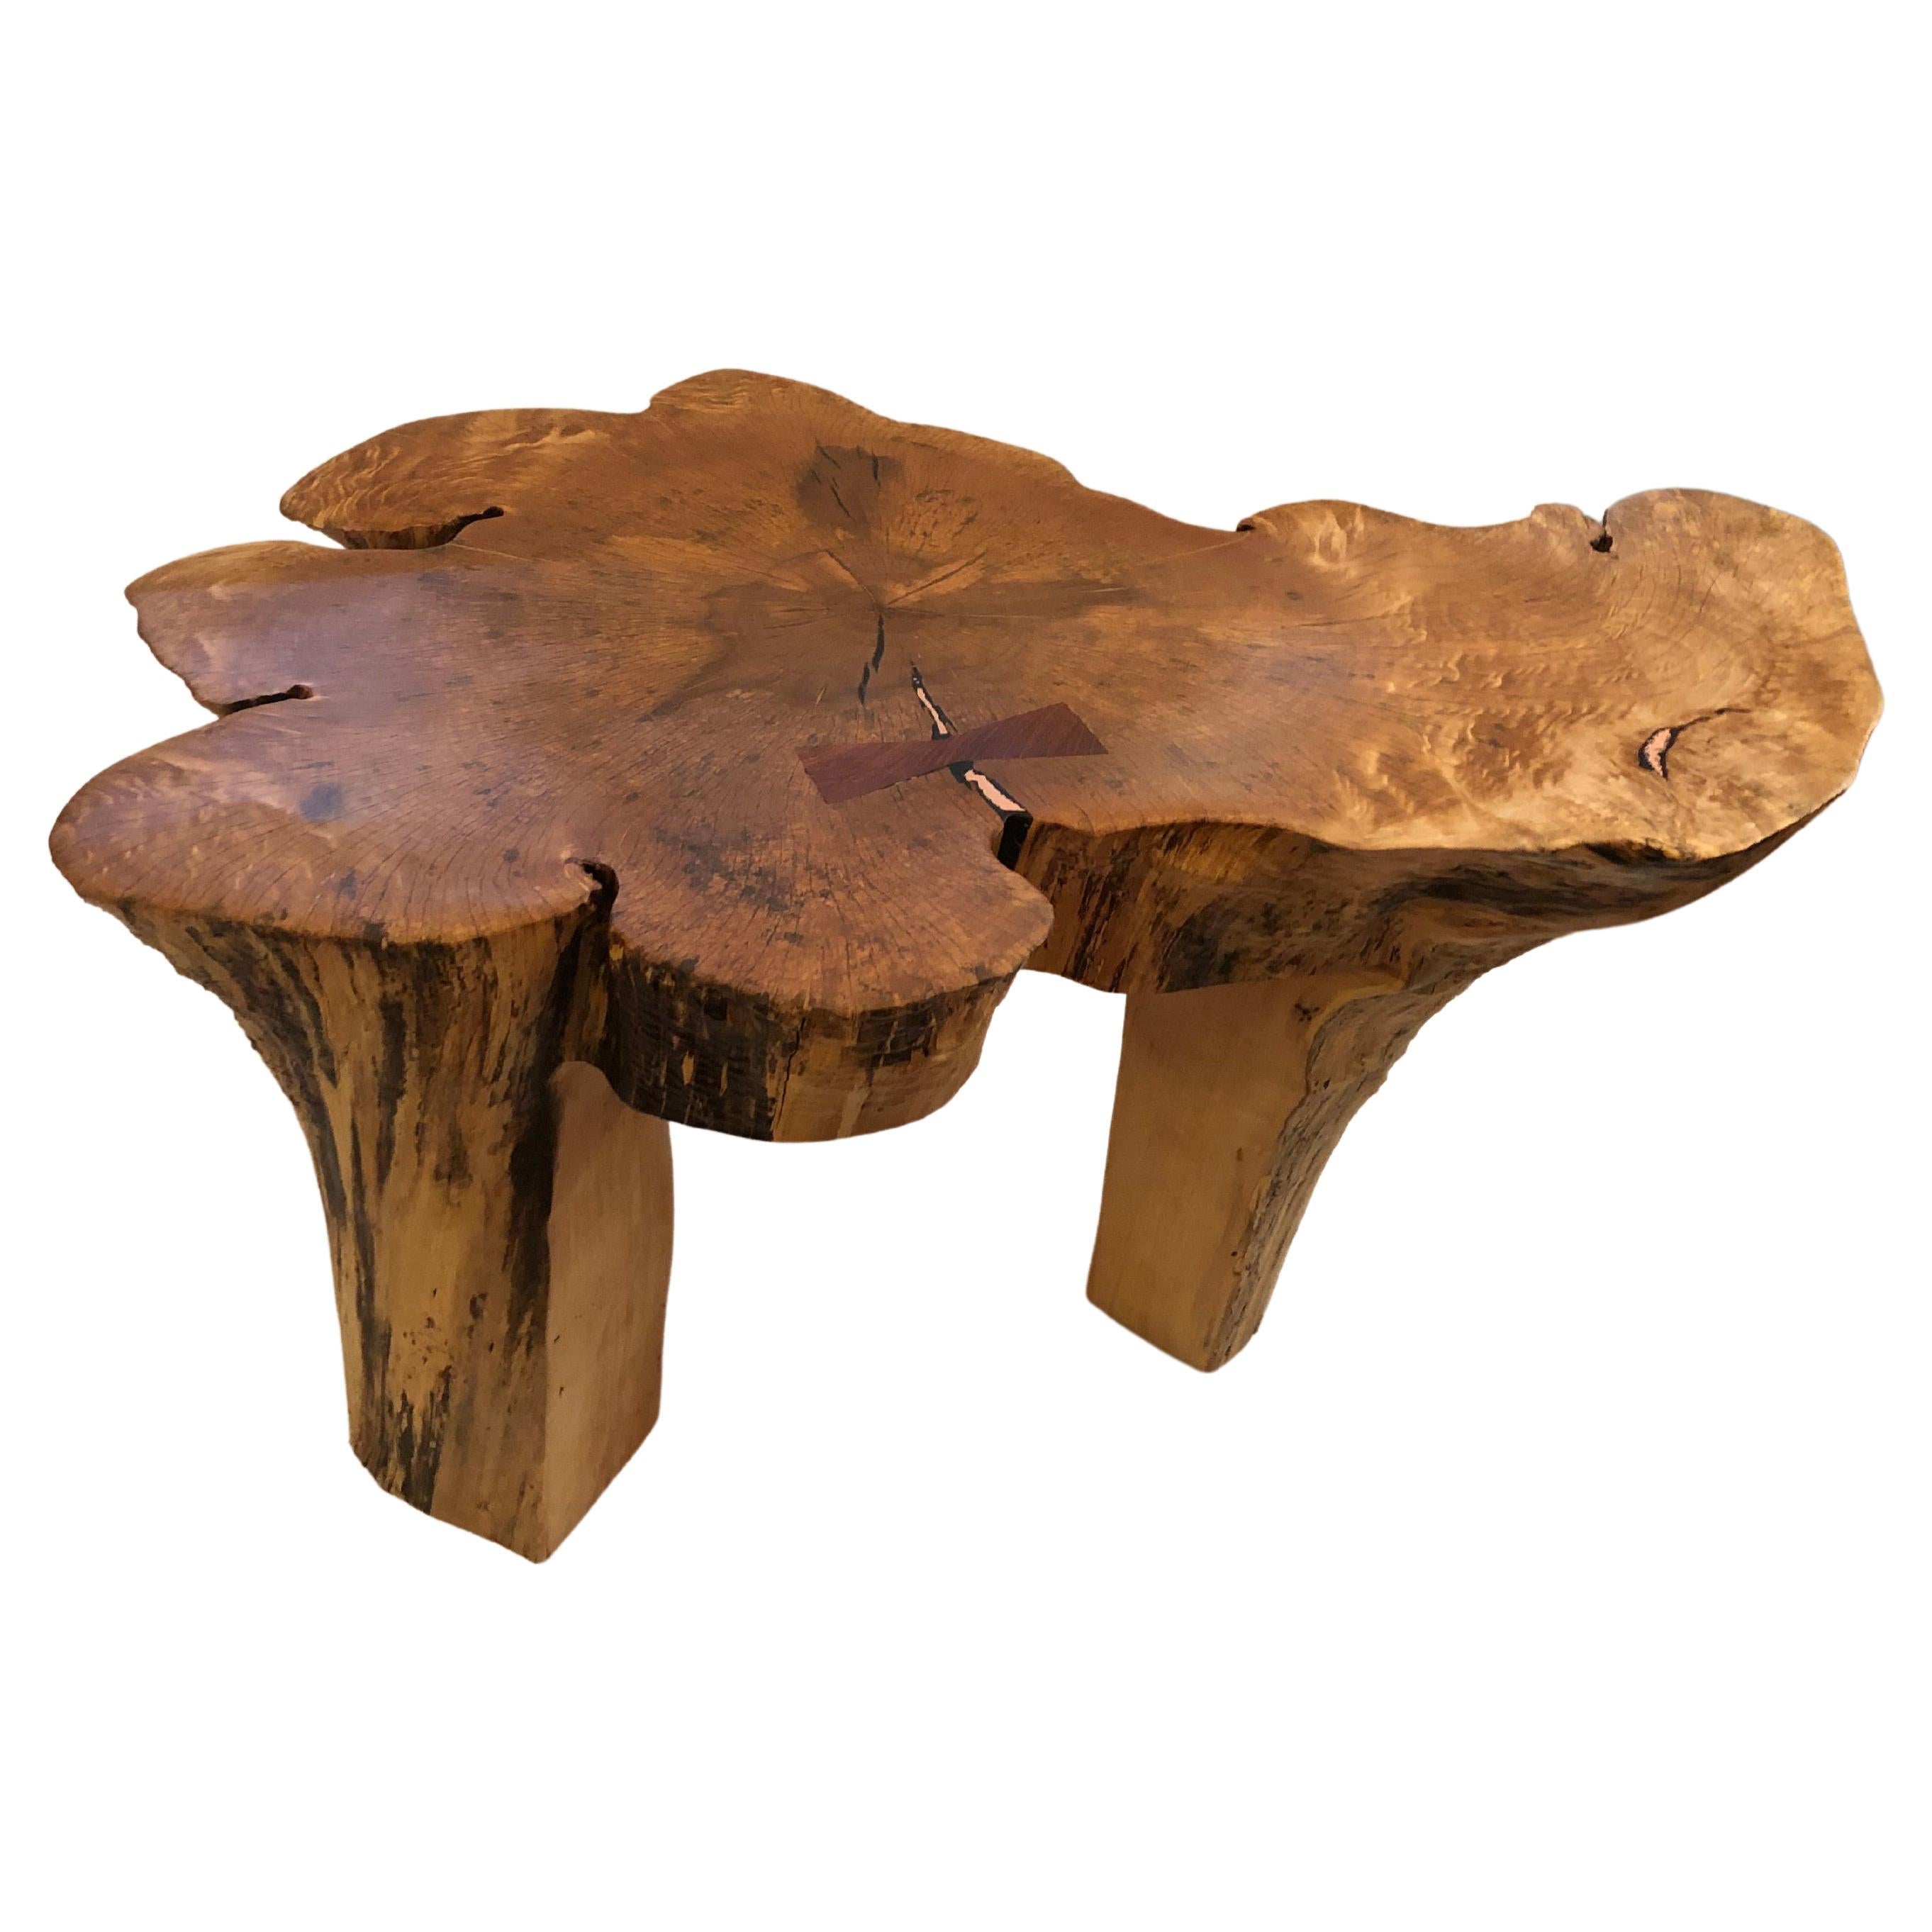 A hand made work of art by NJ wood worker John Braun. This large organic modern amoeba shaped coffee table is made from the salvaged base of a maple tree from the artist's own backyard. The lengthy process includes months of drying the wood and